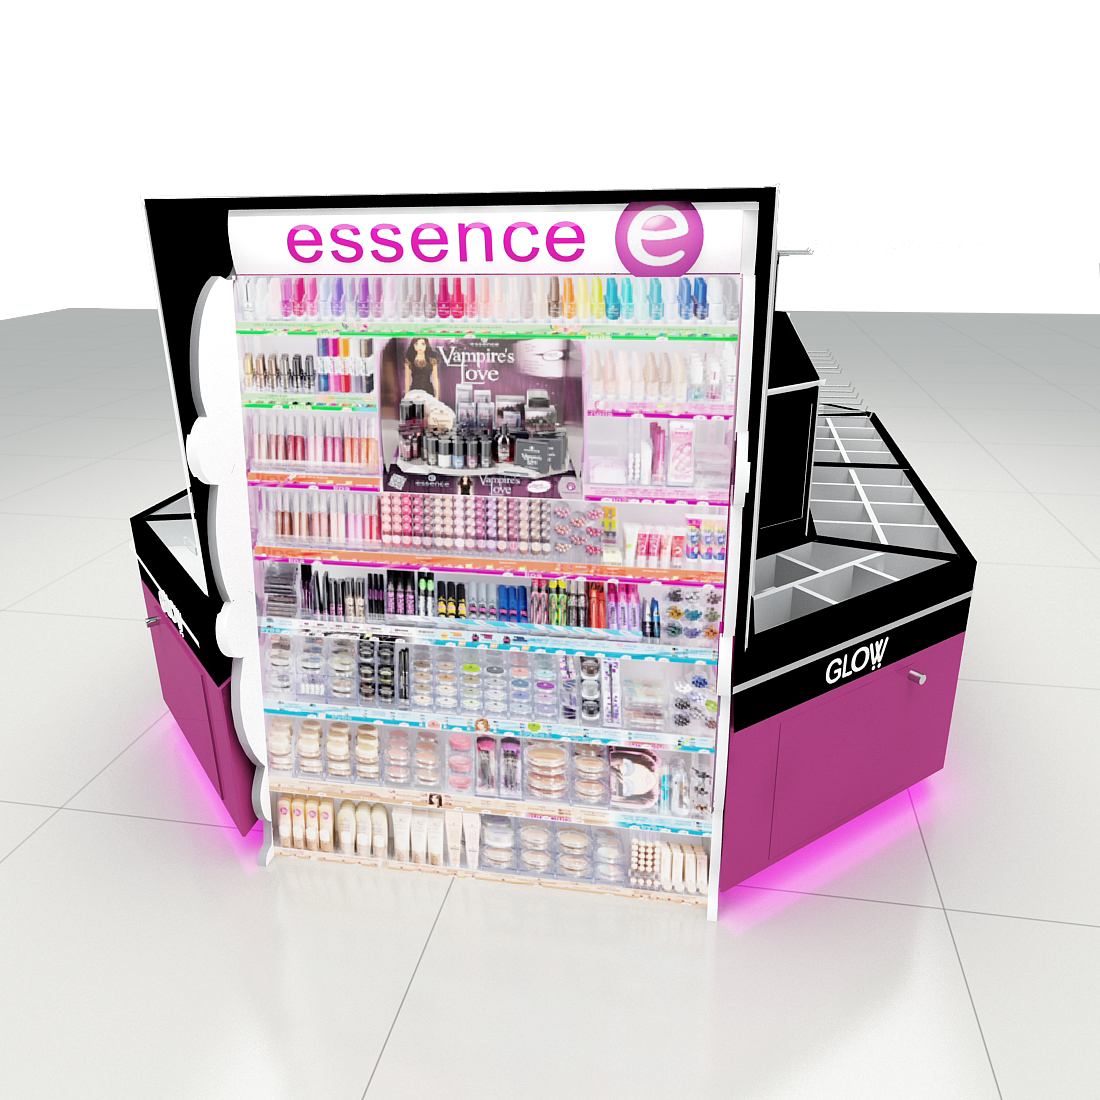 Stand Kiosk women accesories beauty Shopping design architecture light jewelry